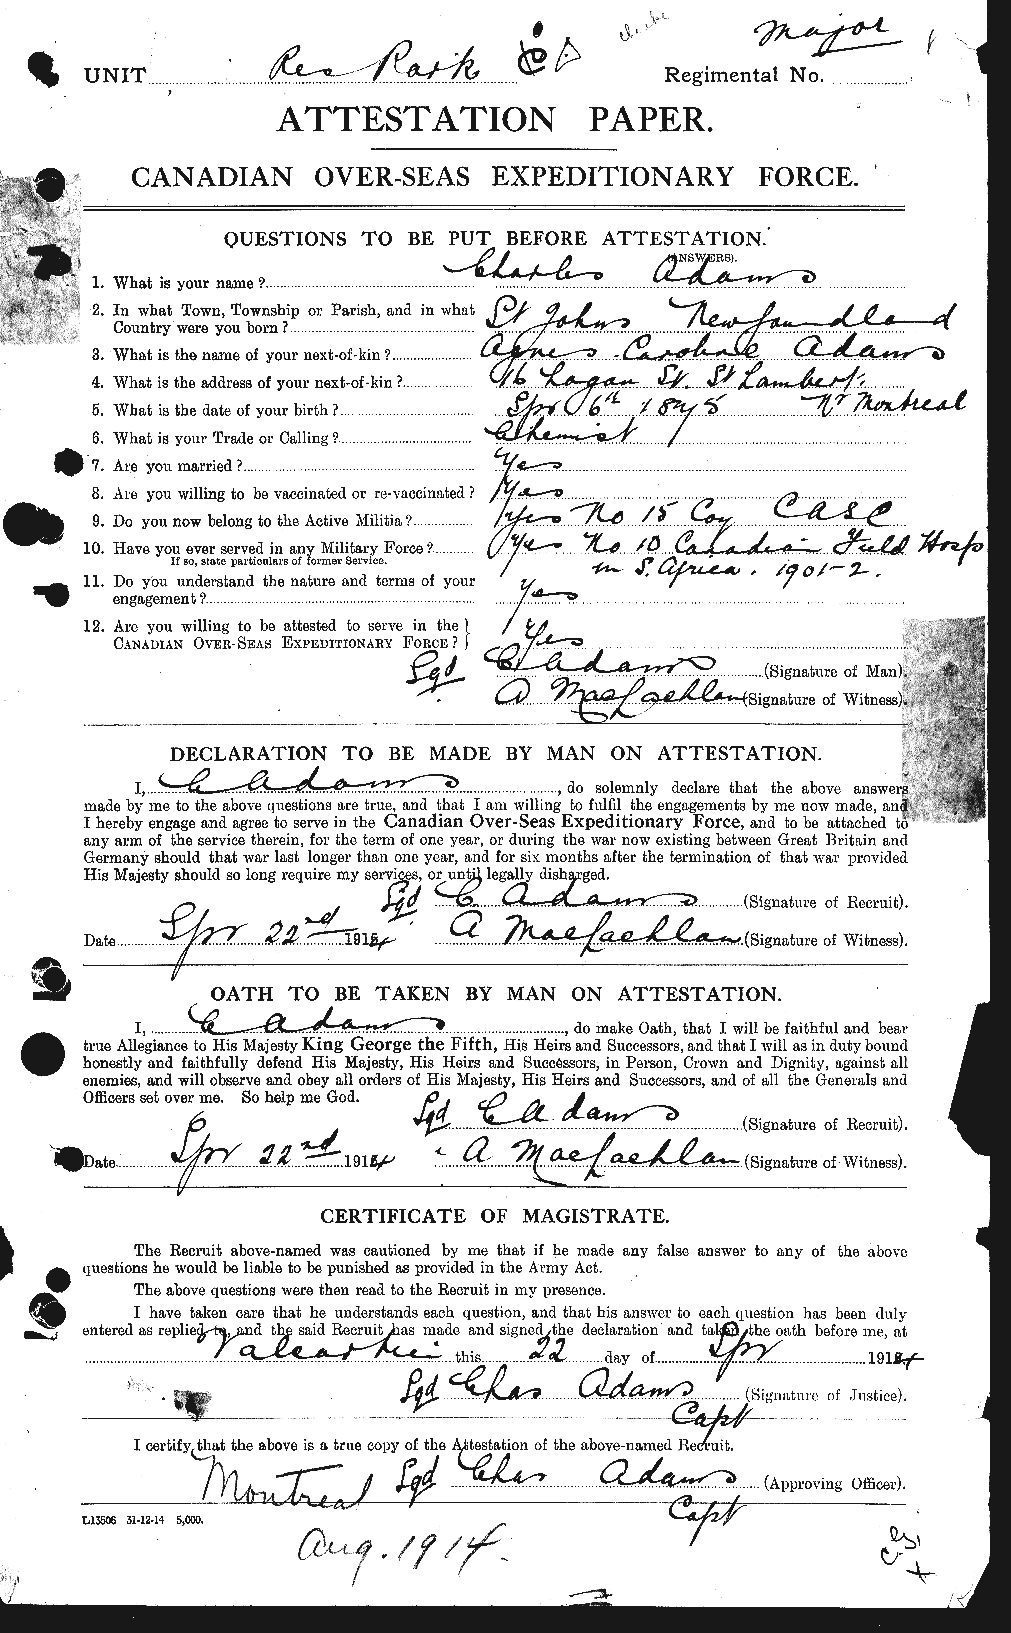 Personnel Records of the First World War - CEF 202056a